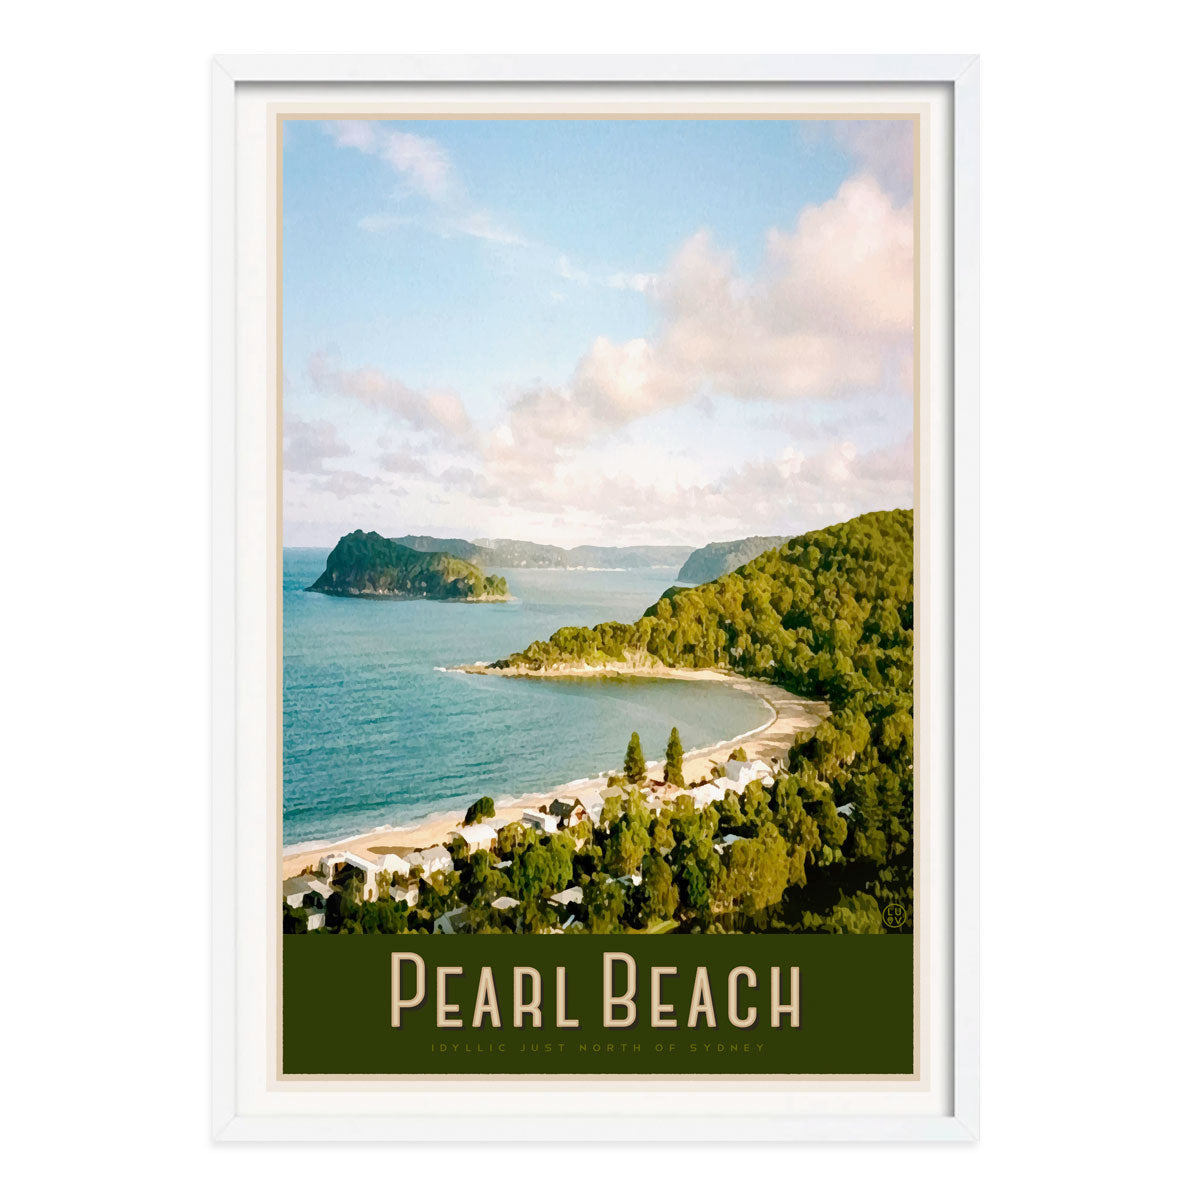 Pearl beach vintage travel poster in white frame central coast by places we luv